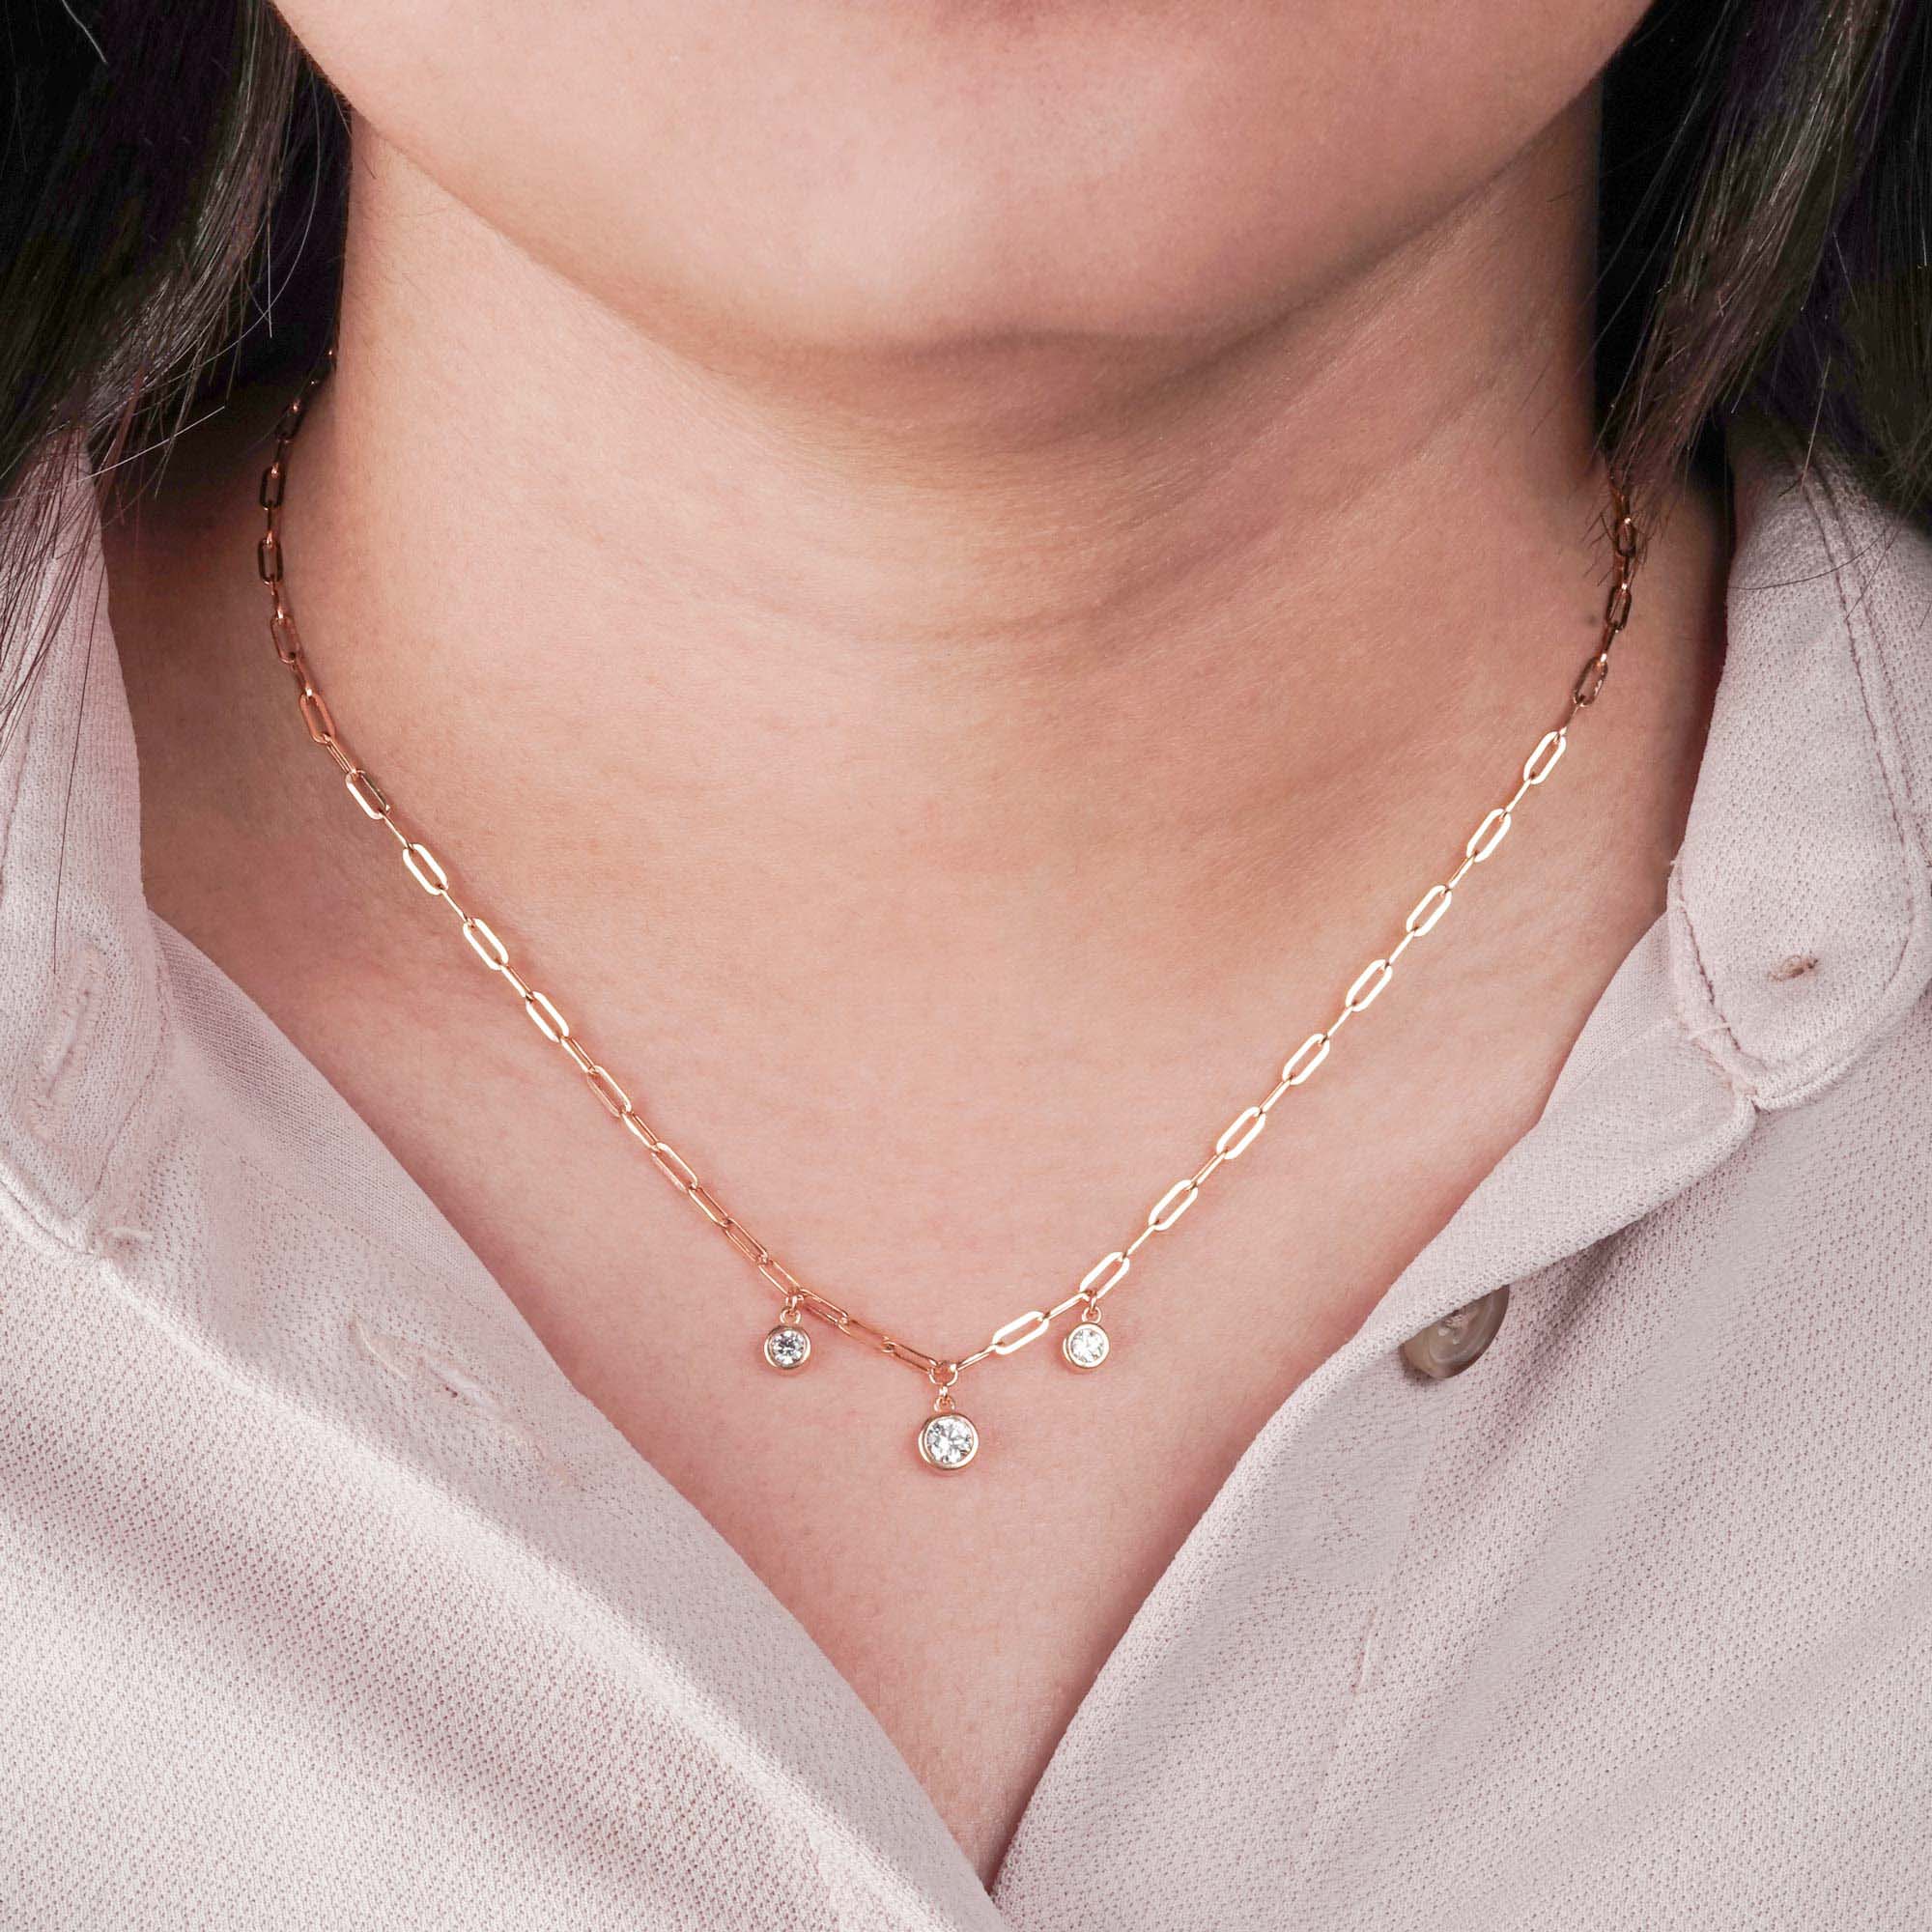 Chara Gold Necklace - Modest Collection - Juene Jewelry